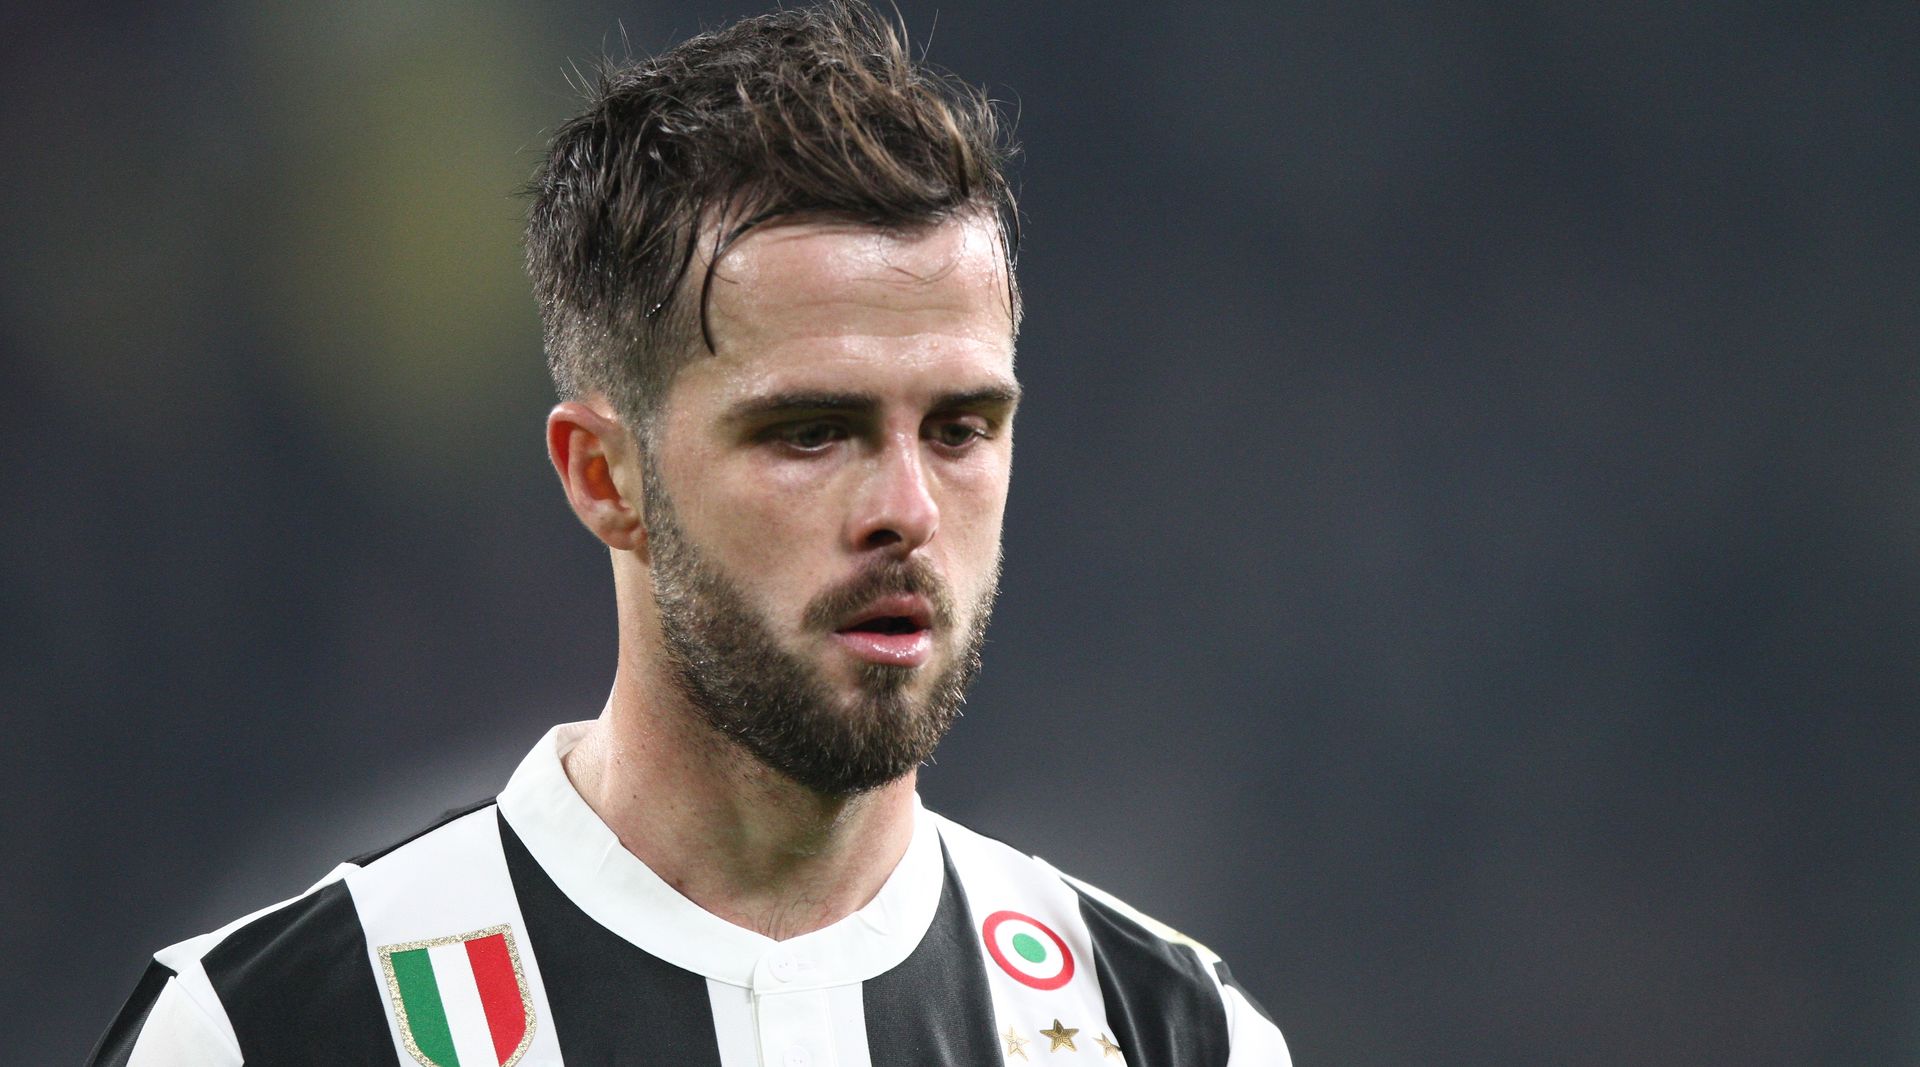 <p>                     One of Bosnia and Herzegovina’s very best players of all time, Miralem Pjanic spent almost all of the 10s in Serie A, joining Roma from Lyon in 2011 then moving on to Juventus in 2016.                   </p>                                      <p>                     A hugely technically gifted playmaker, the midfielder won four straight Scudetti with Juve and made it into four Serie A Teams of the Year.                   </p>